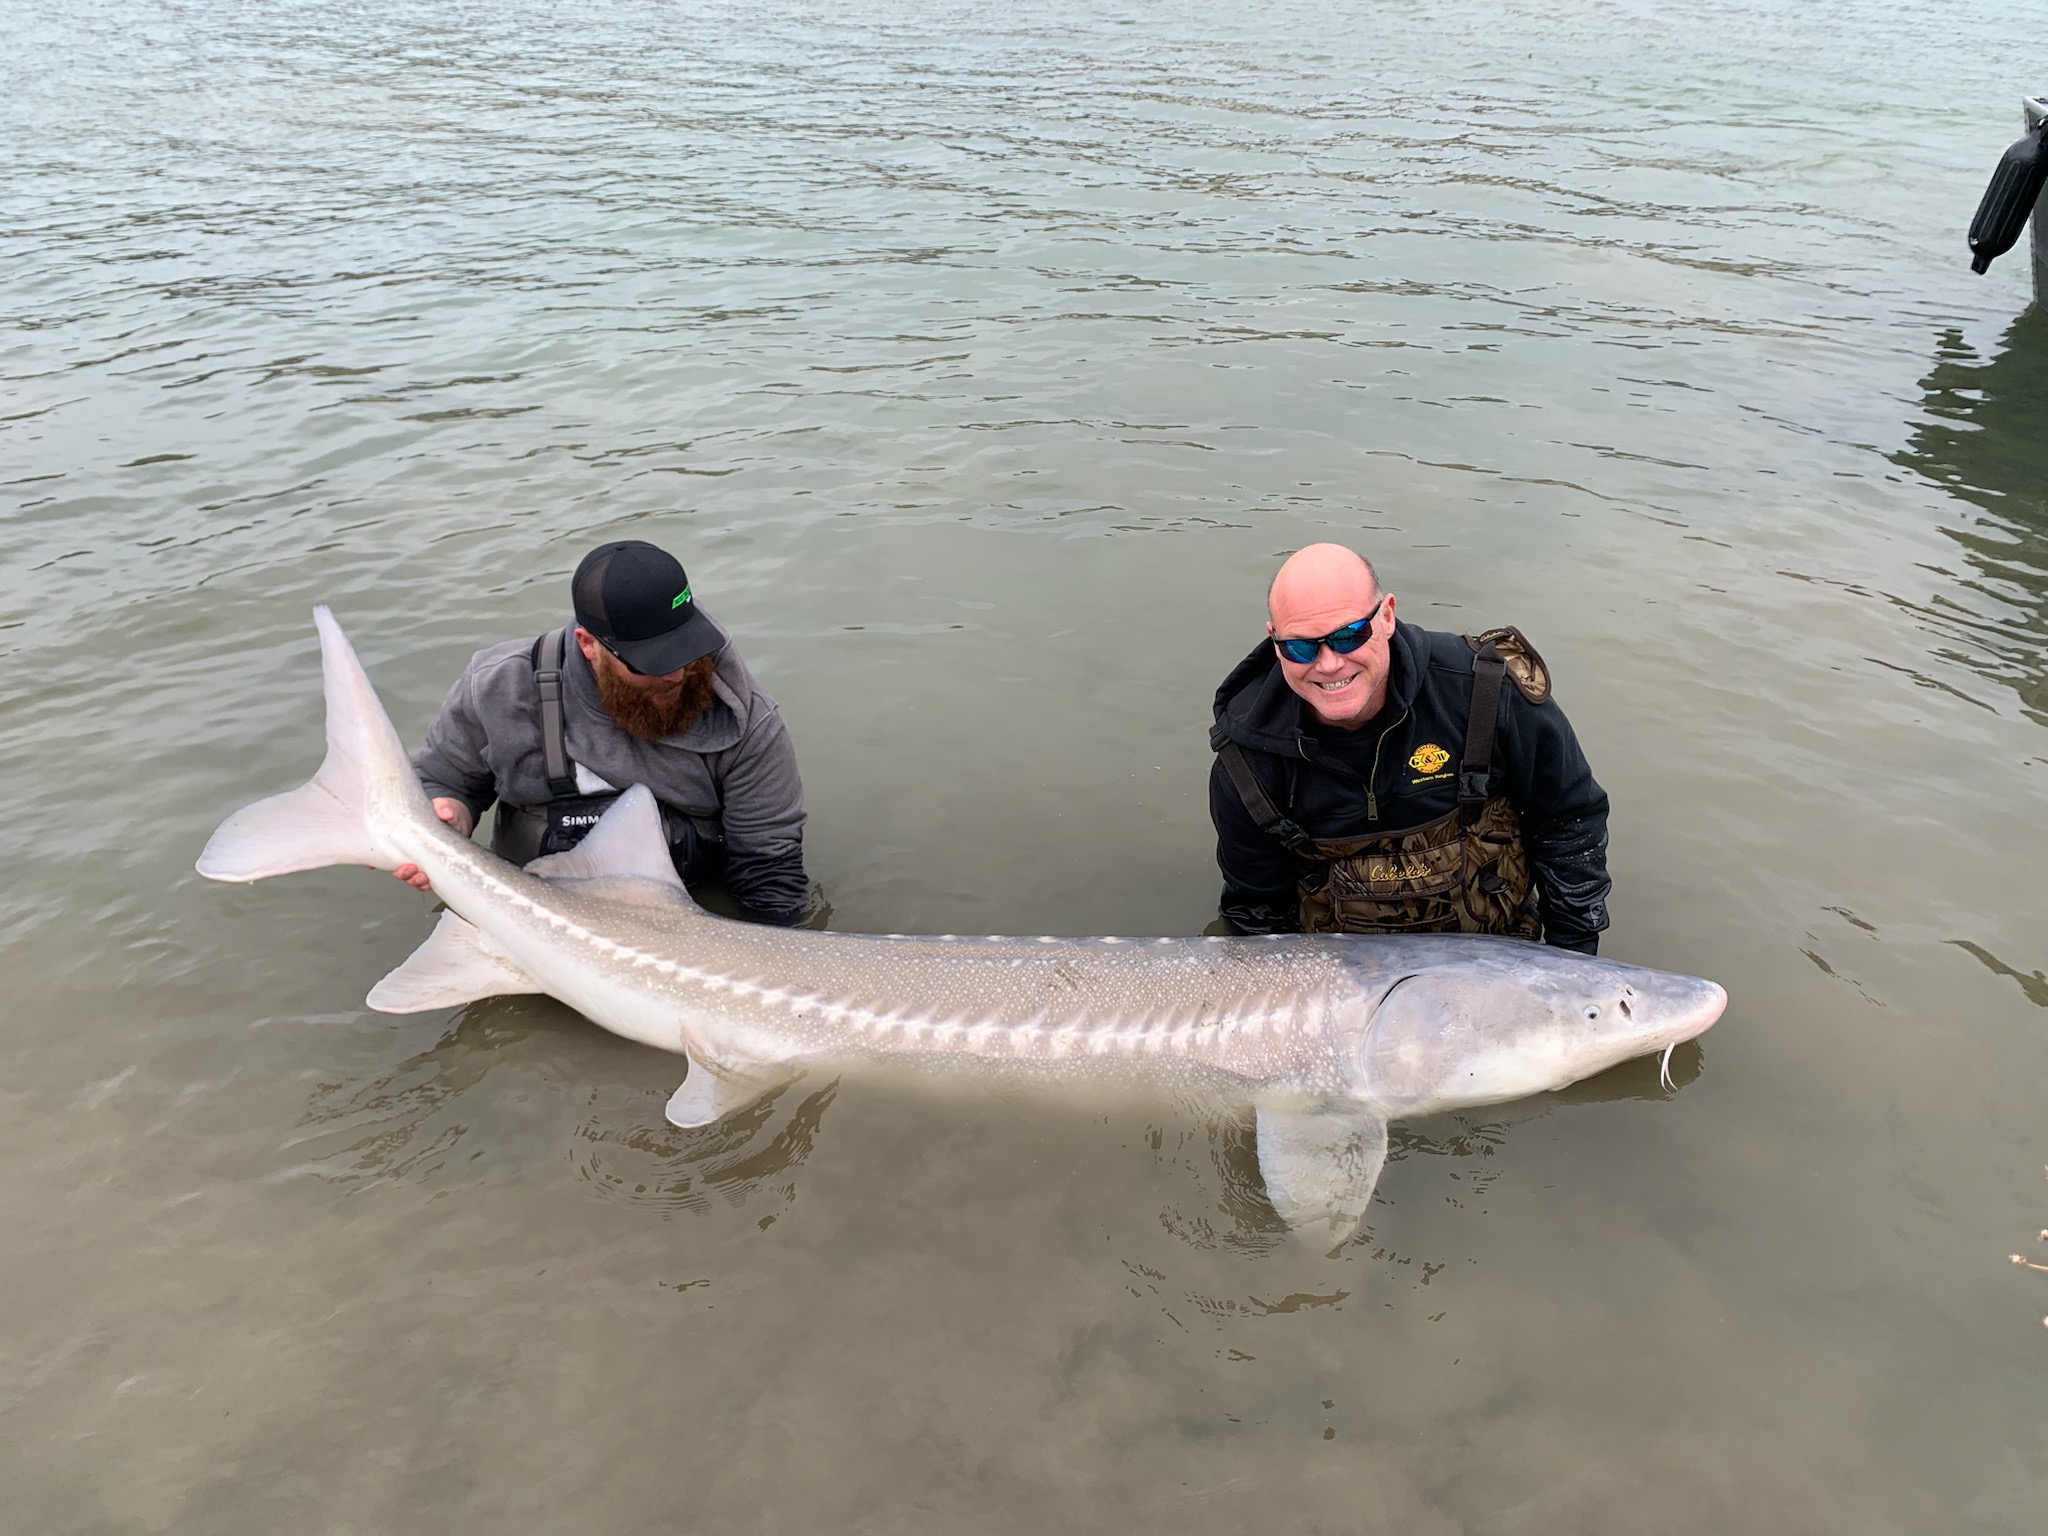 Snake River sturgeon fishing - General Discussion - ARC Discussion